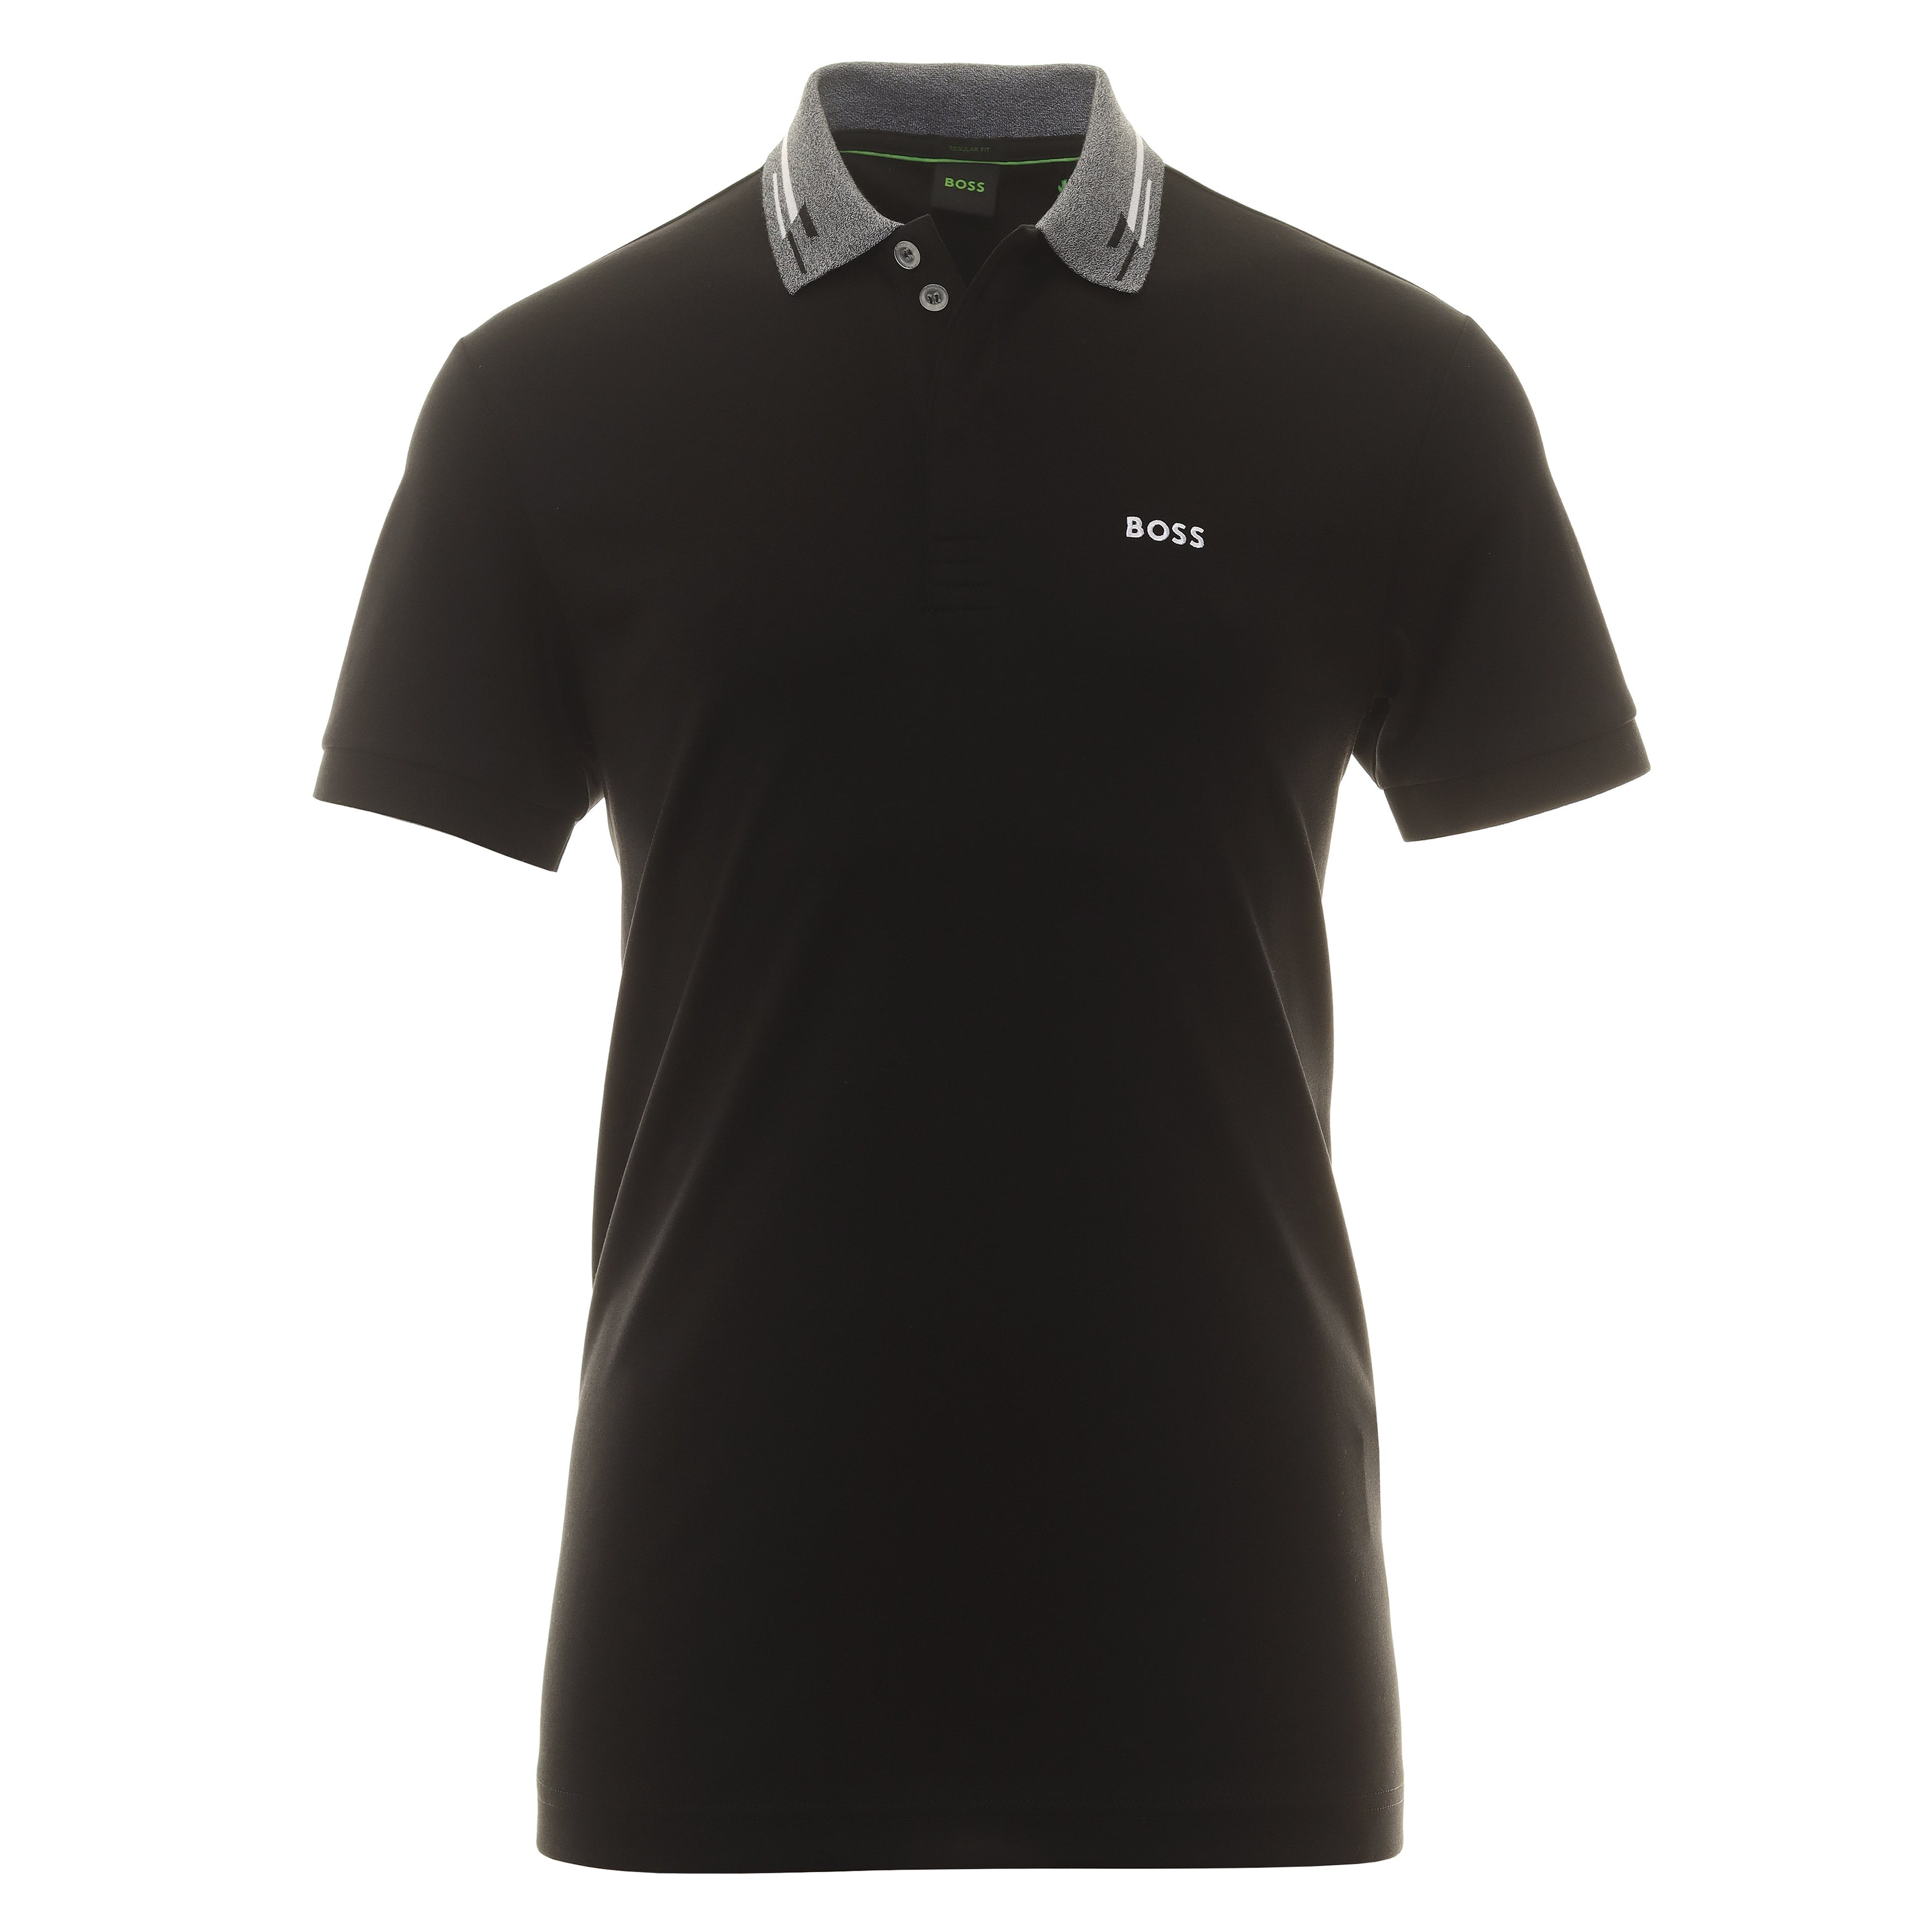 BOSS Paddy 1 Polo Shirt WI23 50501217 Black 001 | Function18 | Restrictedgs